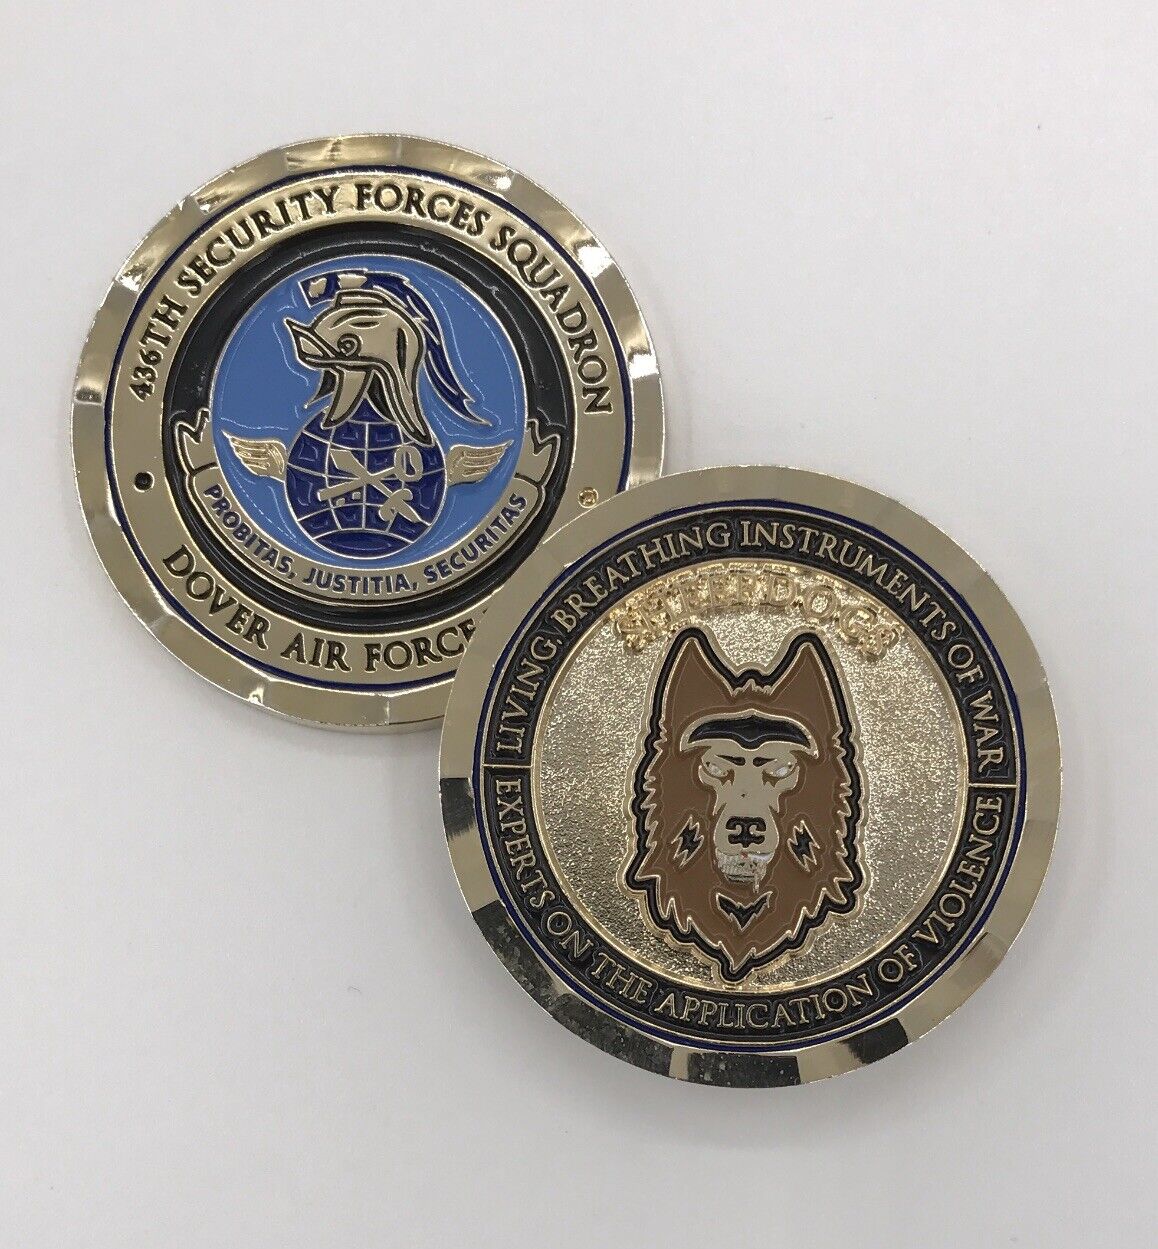 USAF Dover Air Force 436th Security Forces Squadron Sheepdogs Challenge Coin